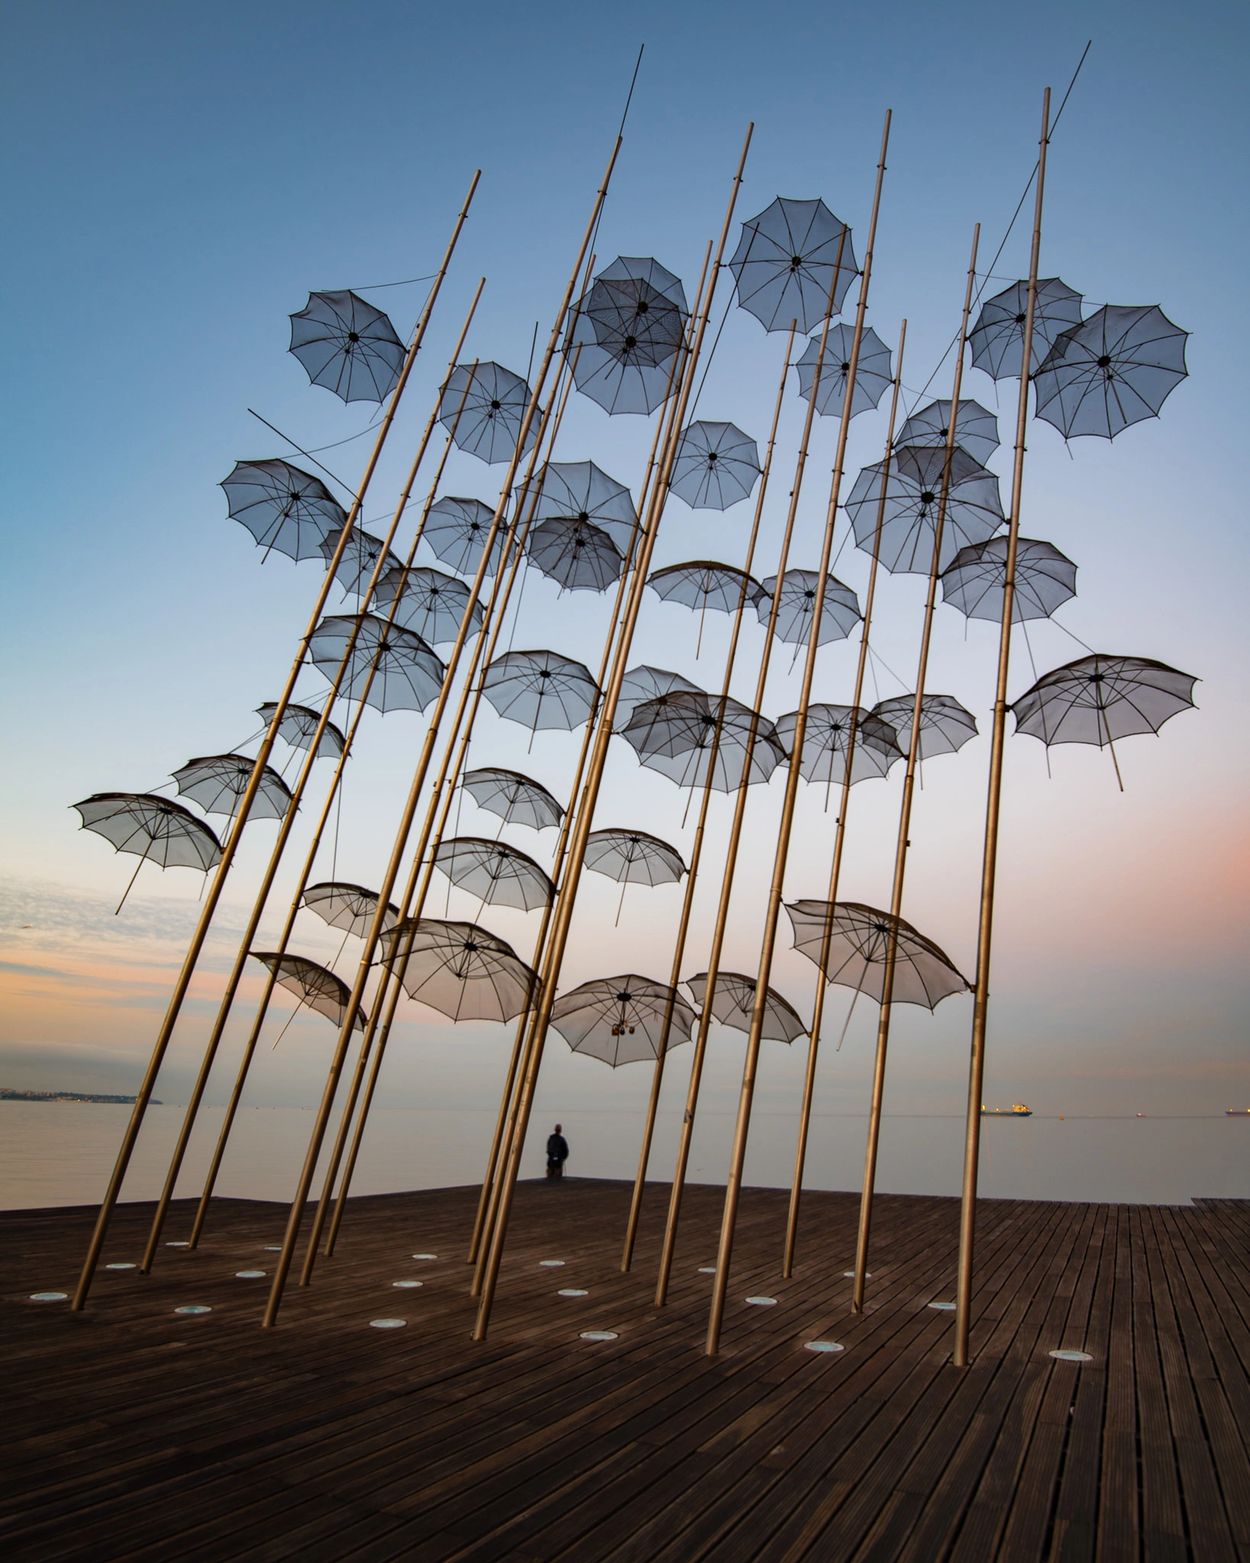 Long exposure of umbrella sculpture along the waterfront in Thessaloniki, Greece.